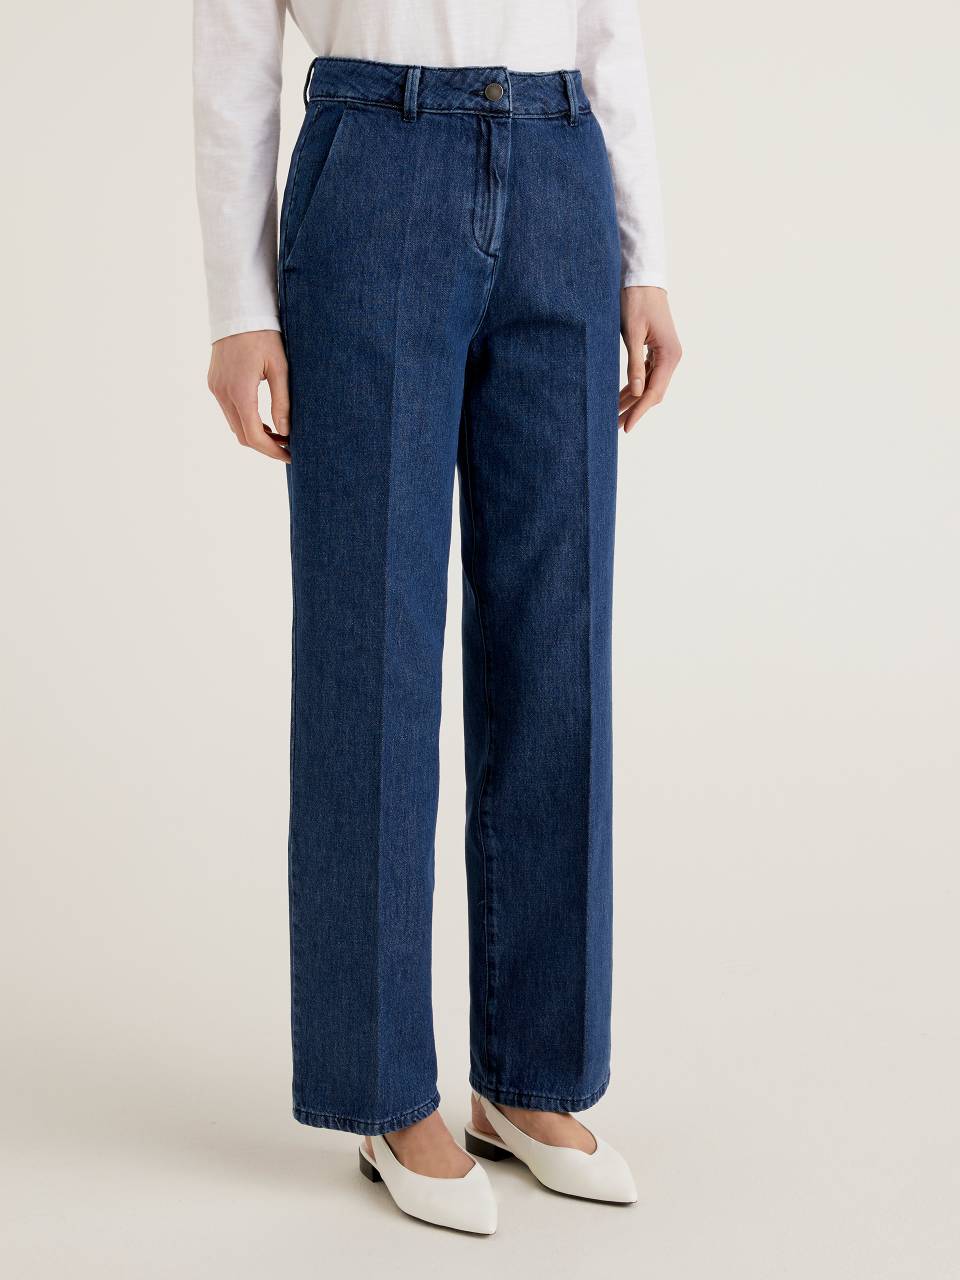 Benetton Wide fit jeans in 100% cotton. 1